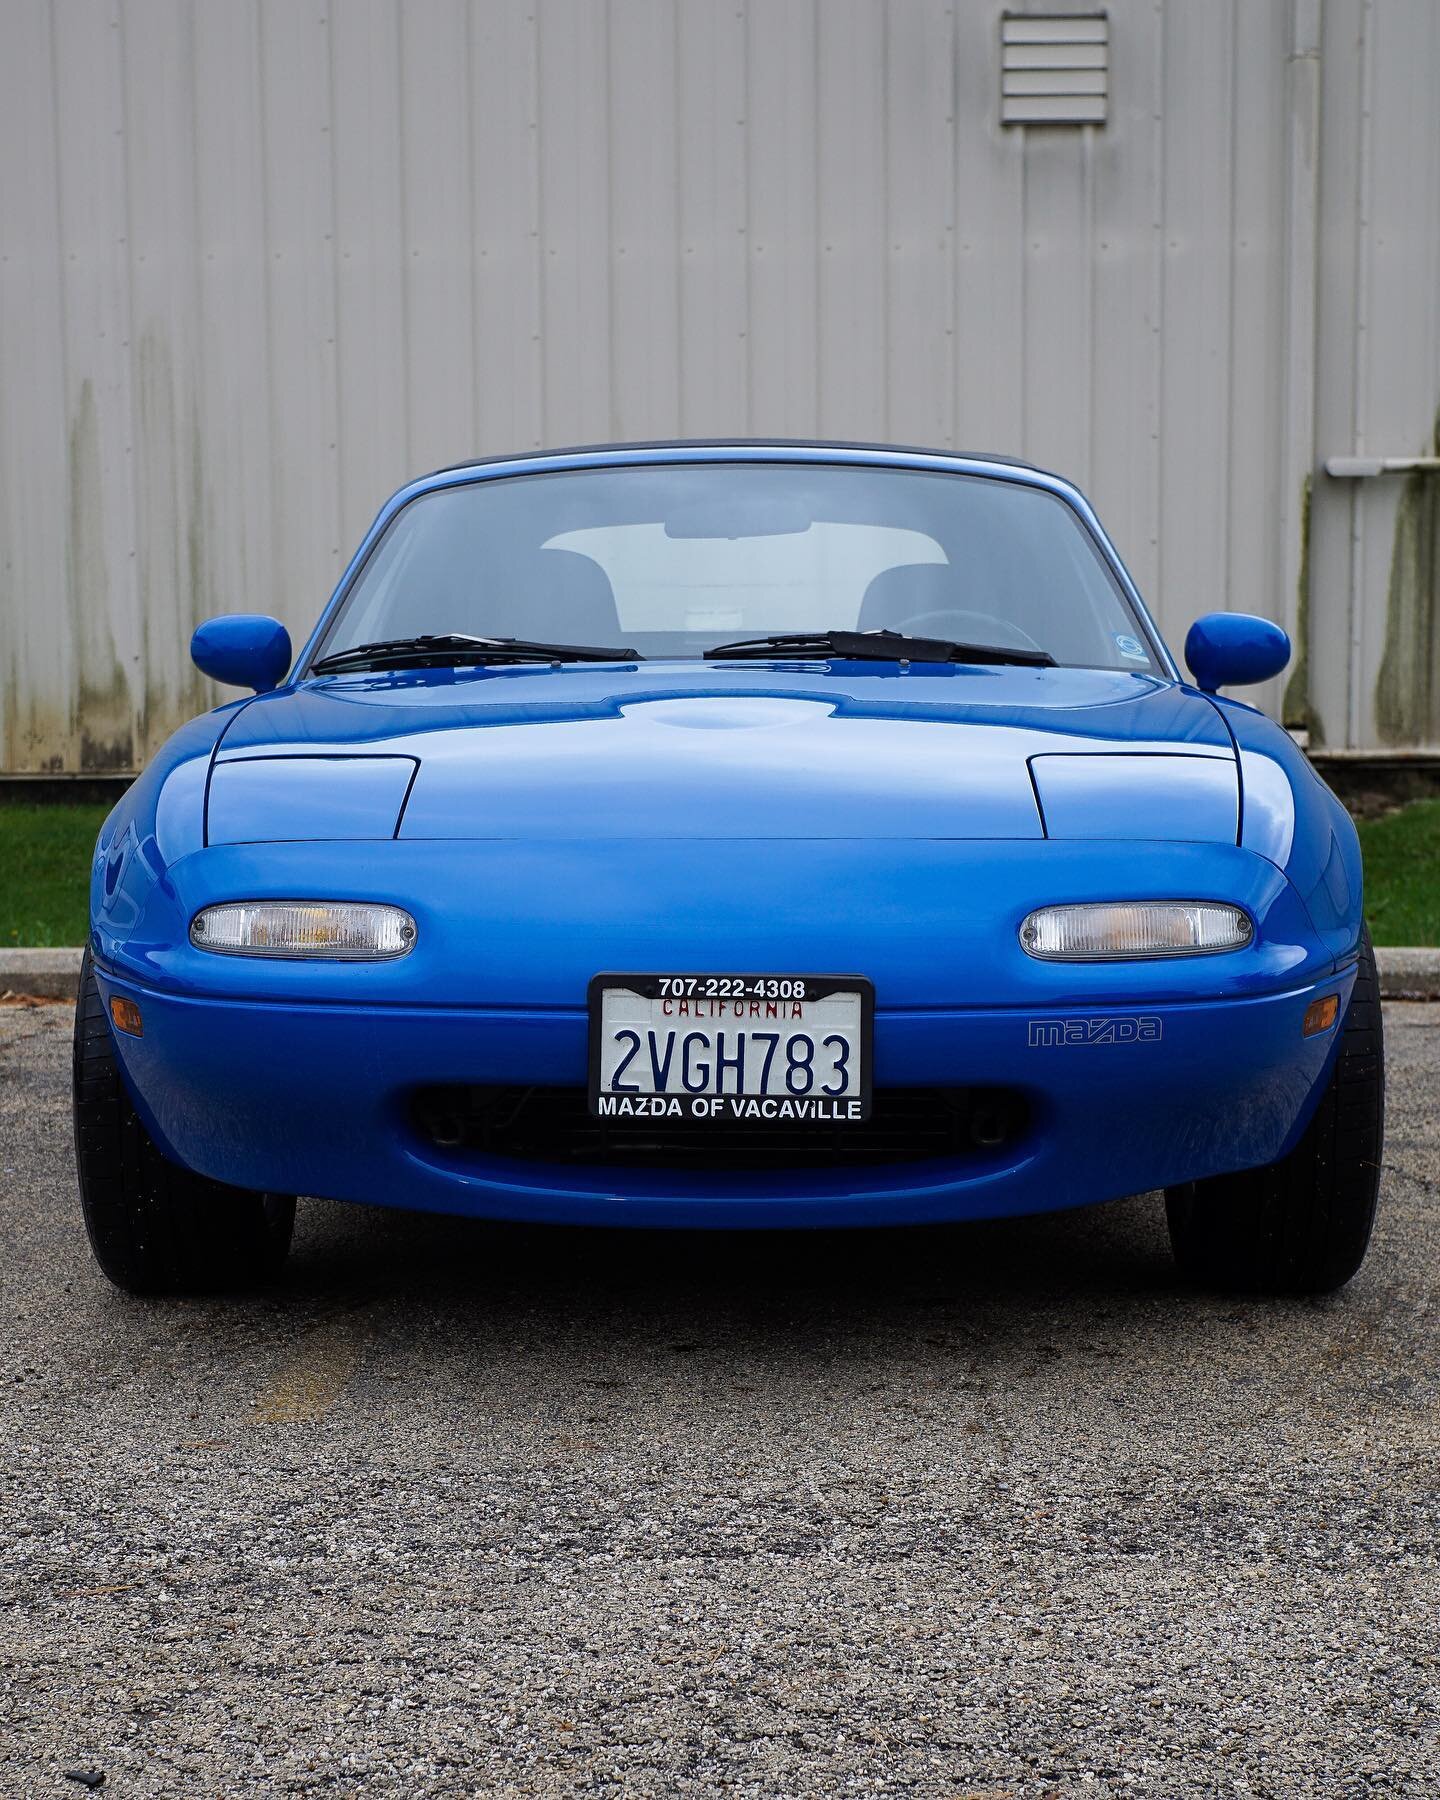 This customer received our Complete Detail Package, keeping his beautiful Mazda Miata looking it&rsquo;s best. 

For those who know and don&rsquo;t, Miata&rsquo;s of this generation tend to be fairly beat up, rusty, and or discolored, etc. This one h